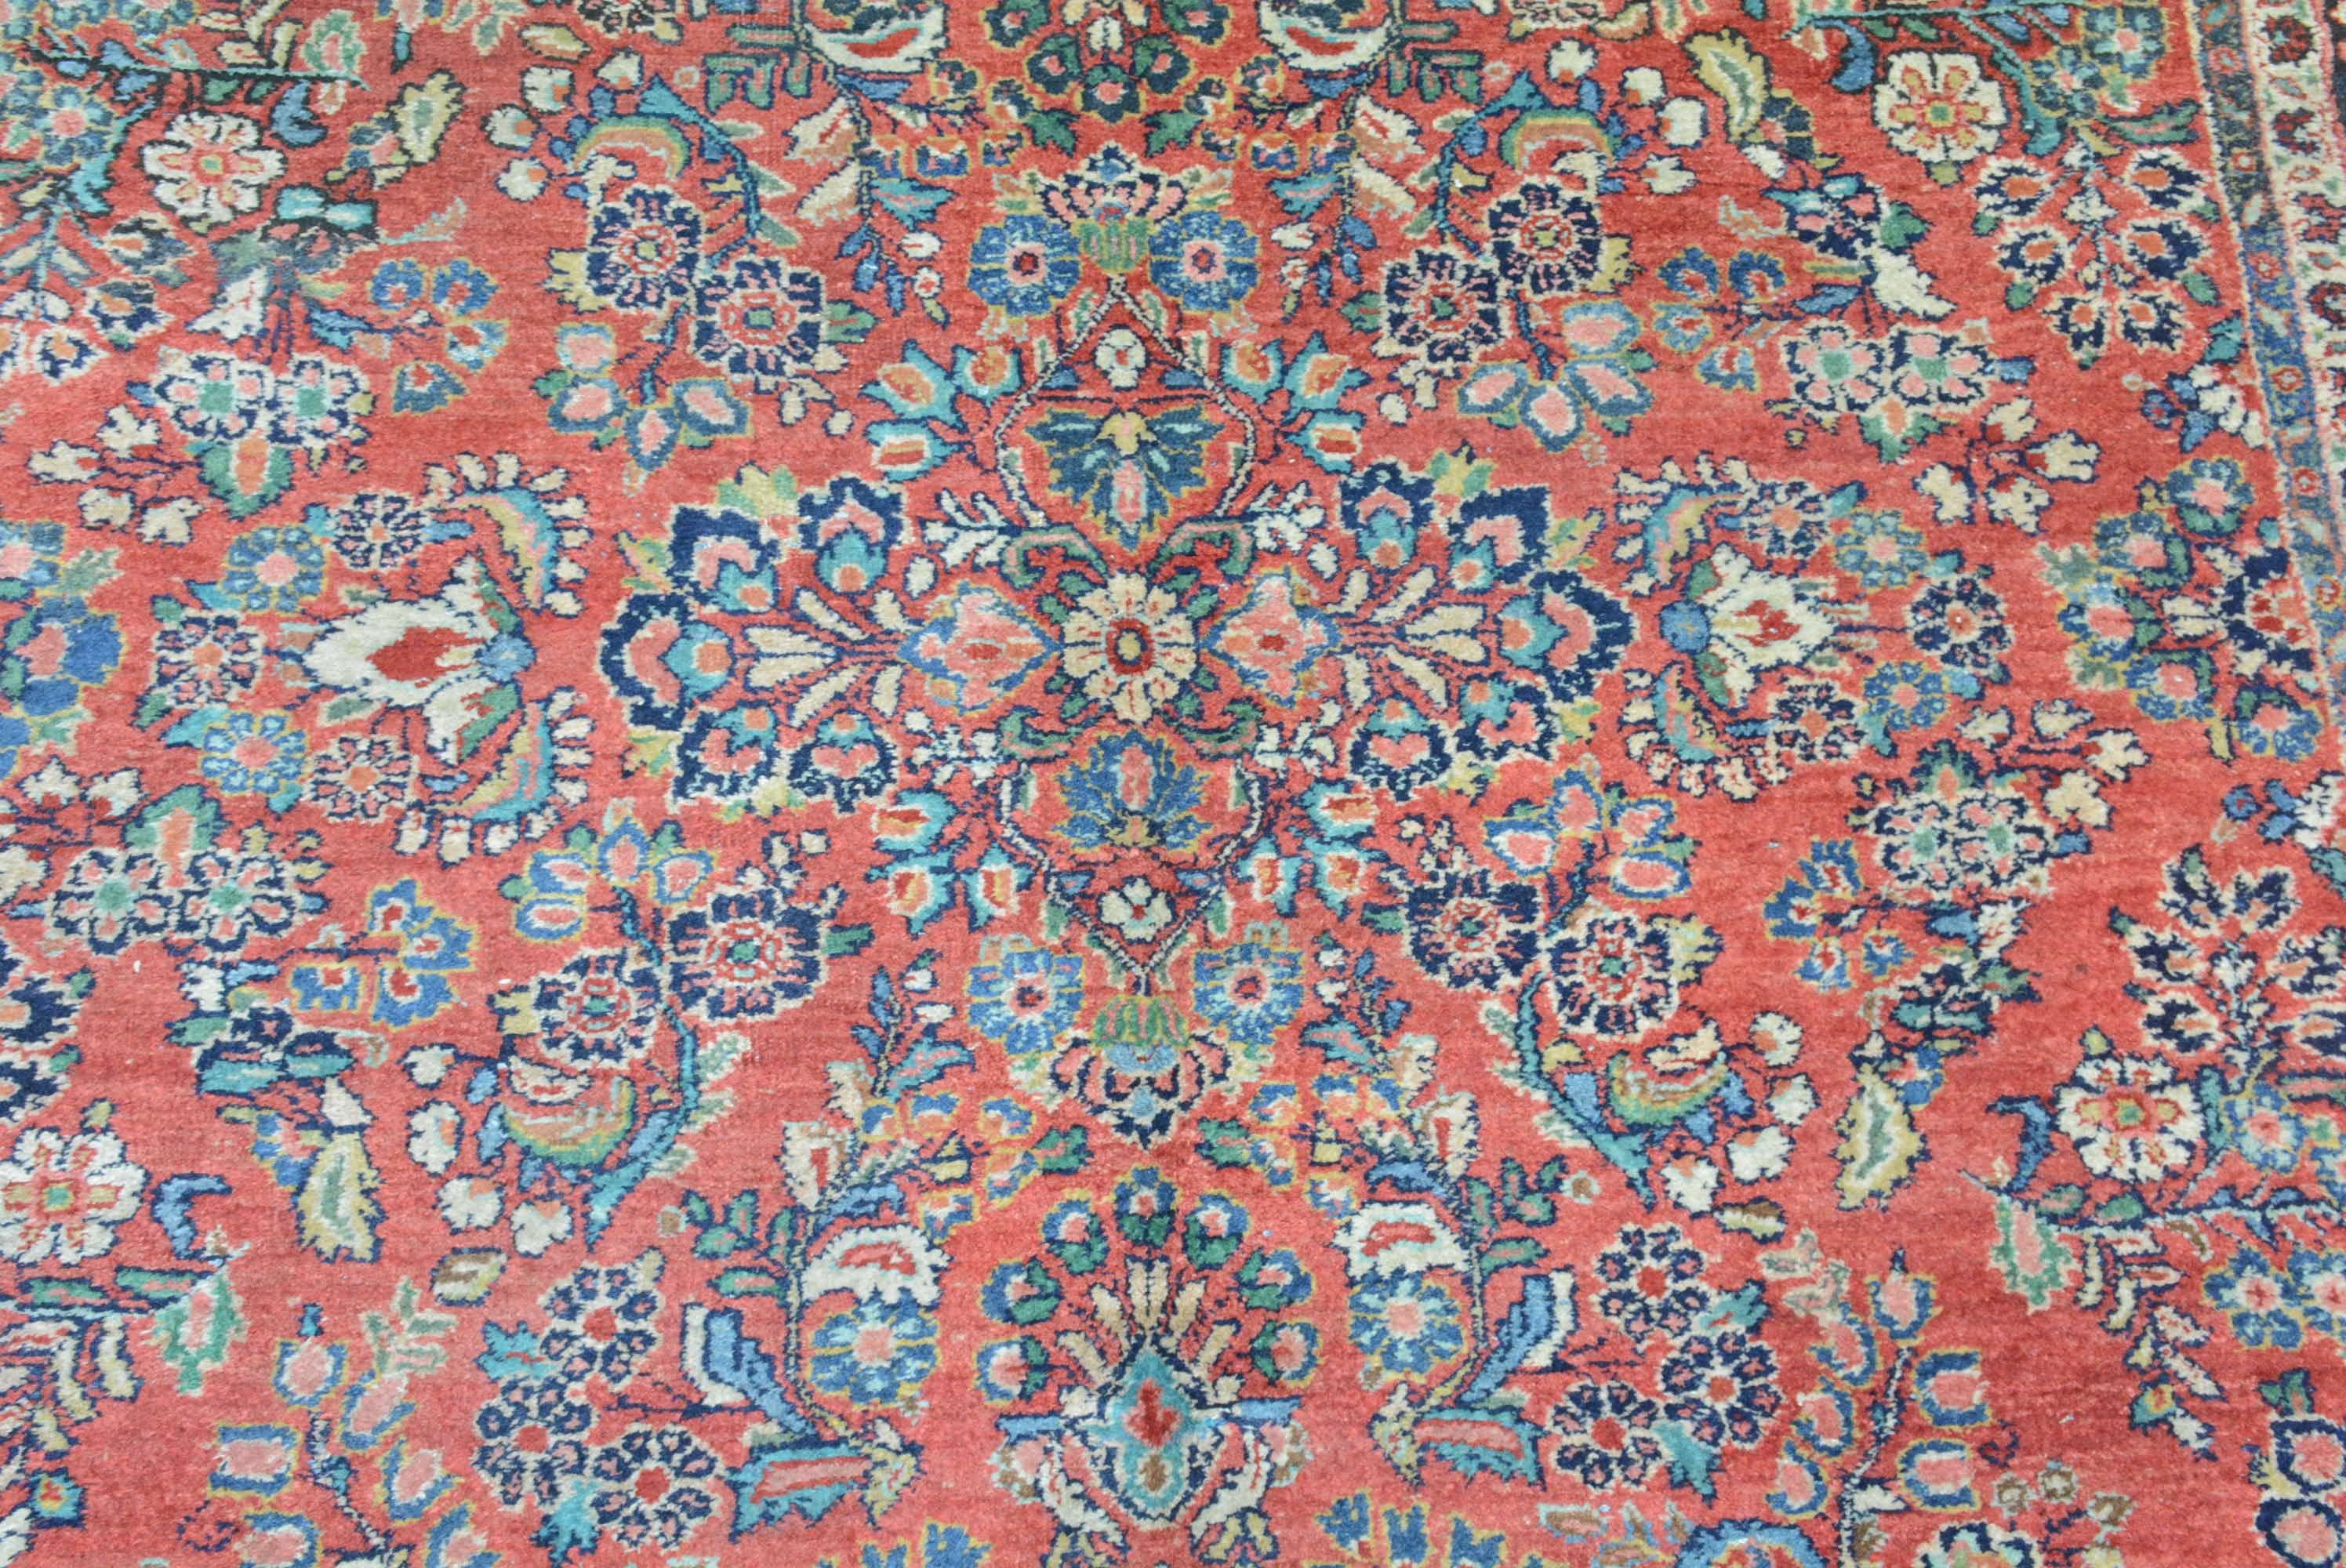 The village of Sarouk in the Arak province in northern Persia is known for producing finely woven rugs and carpets.  These rugs most often have central floral medallions flanked by sprays on either a madder or indigo field.  During the first quarter